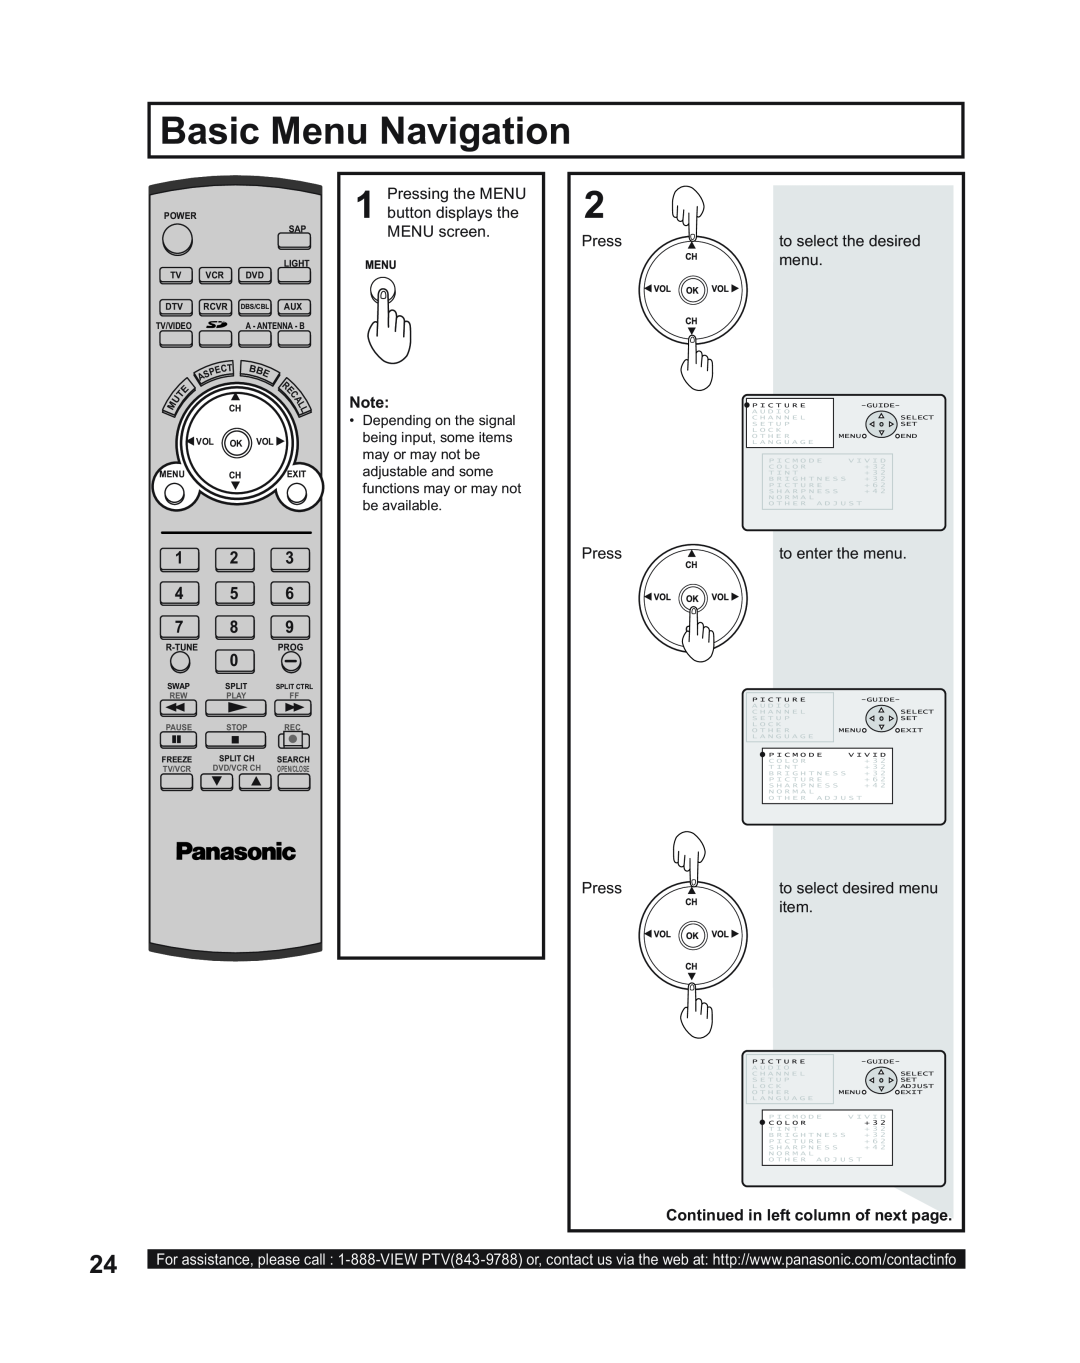 Panasonic PT-43LC14 Basic Menu Navigation, Continued in left column of next page, Depending on the signal, be available 